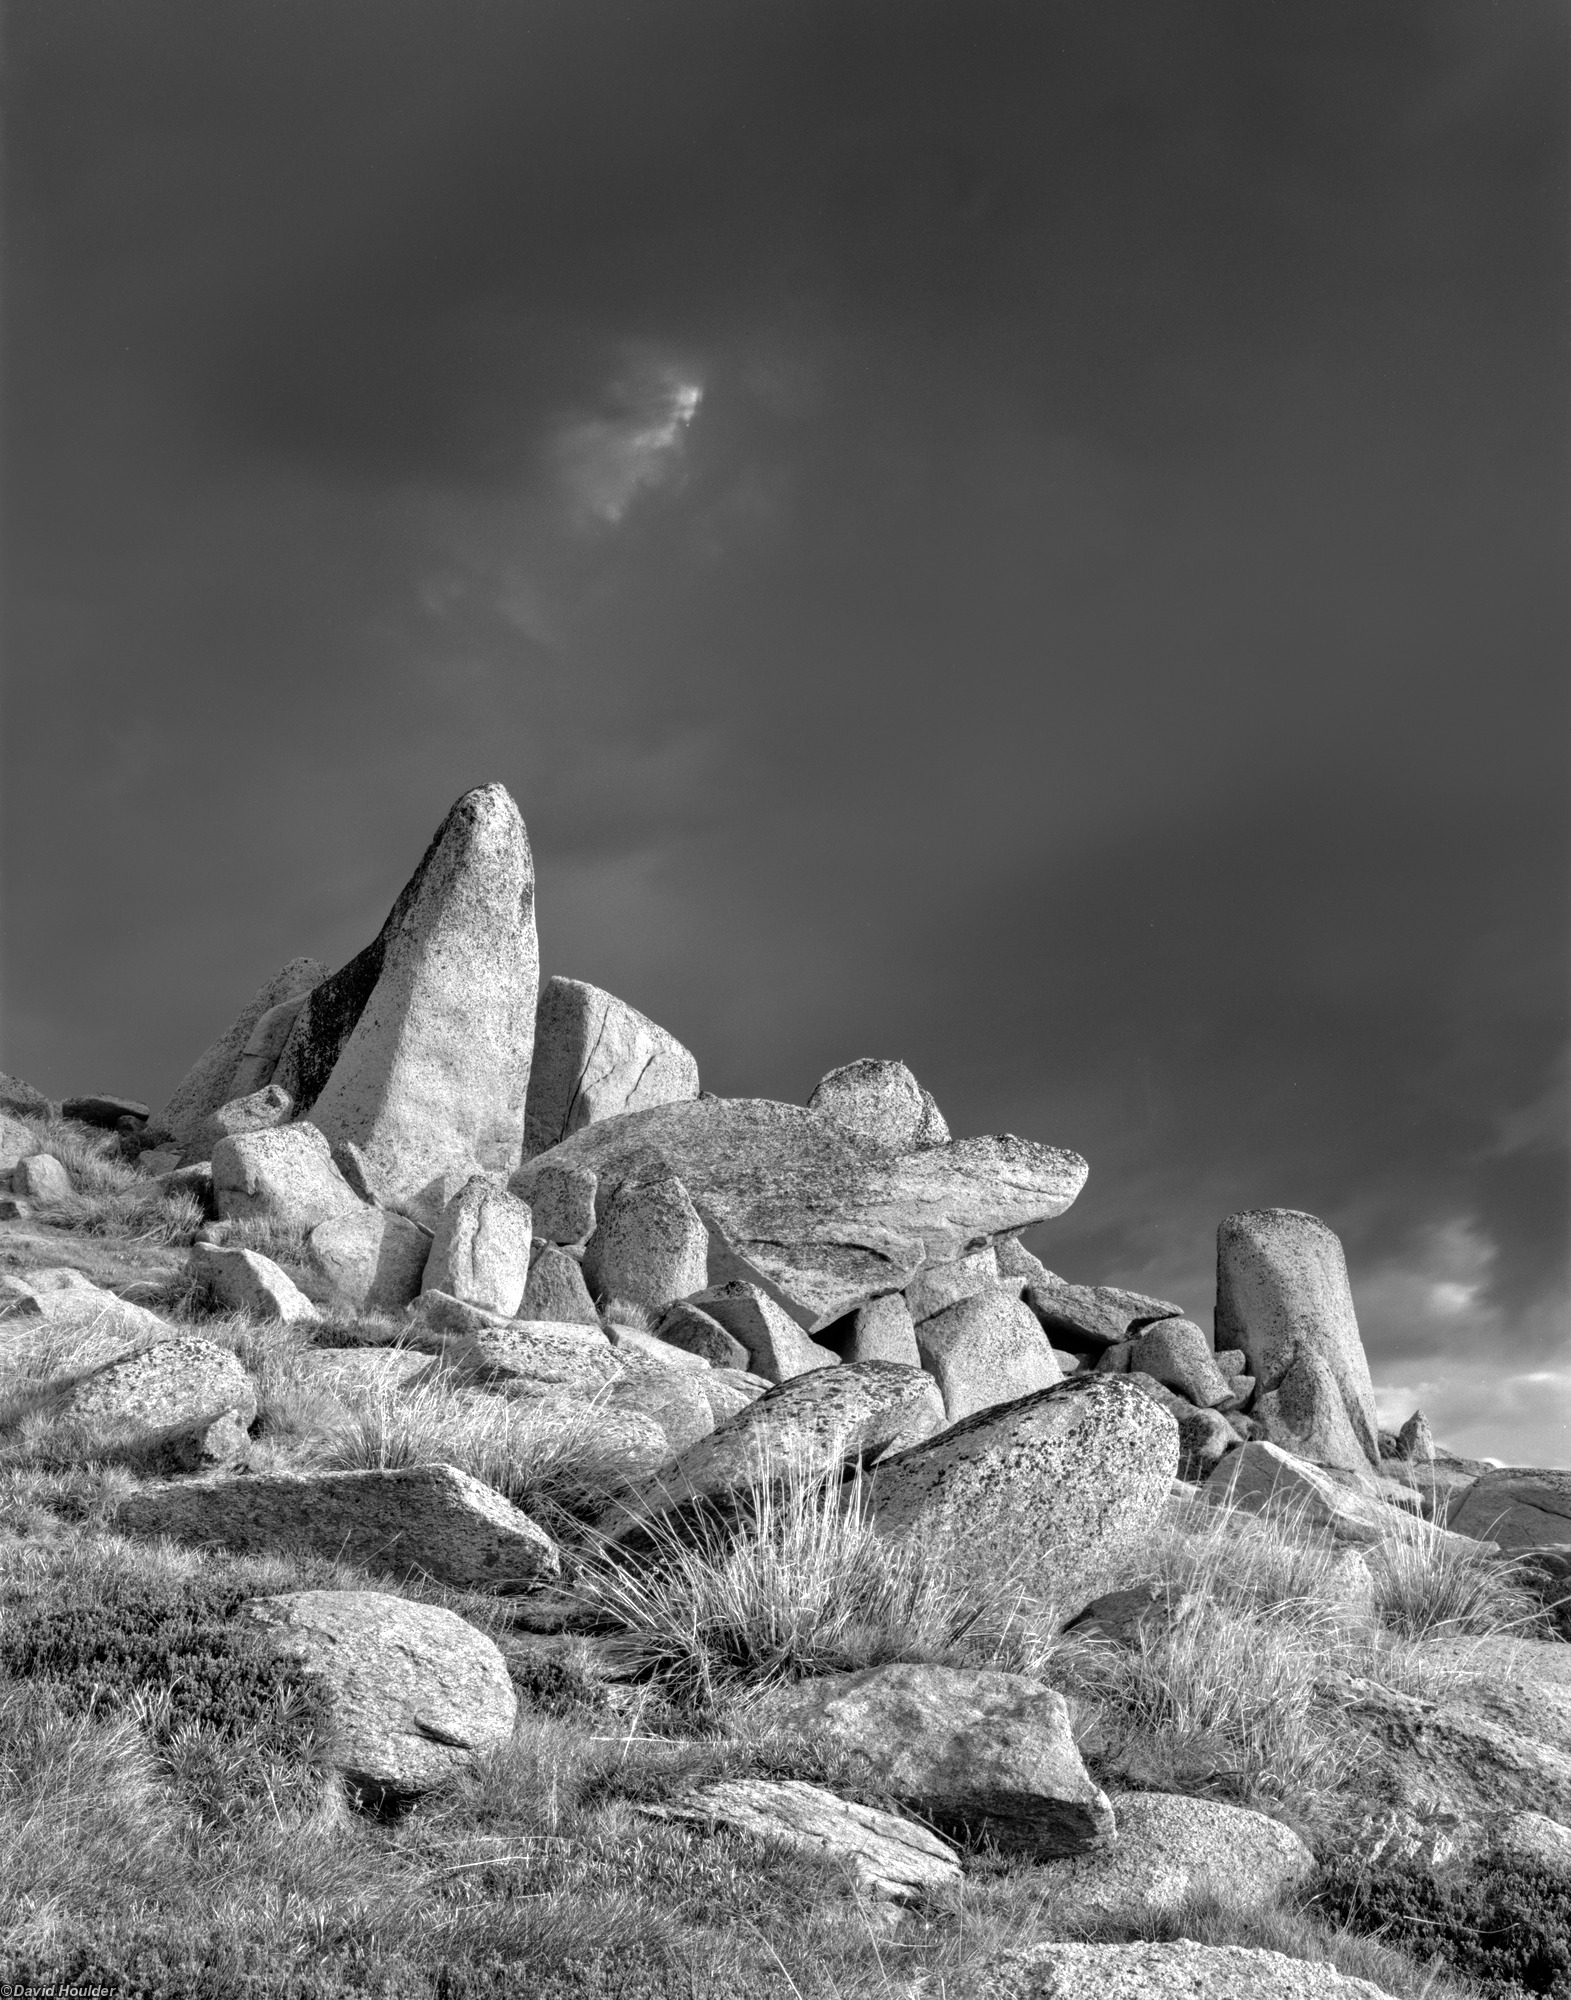 Angular granite boulders with grasses in the foreground and storm clouds behind.